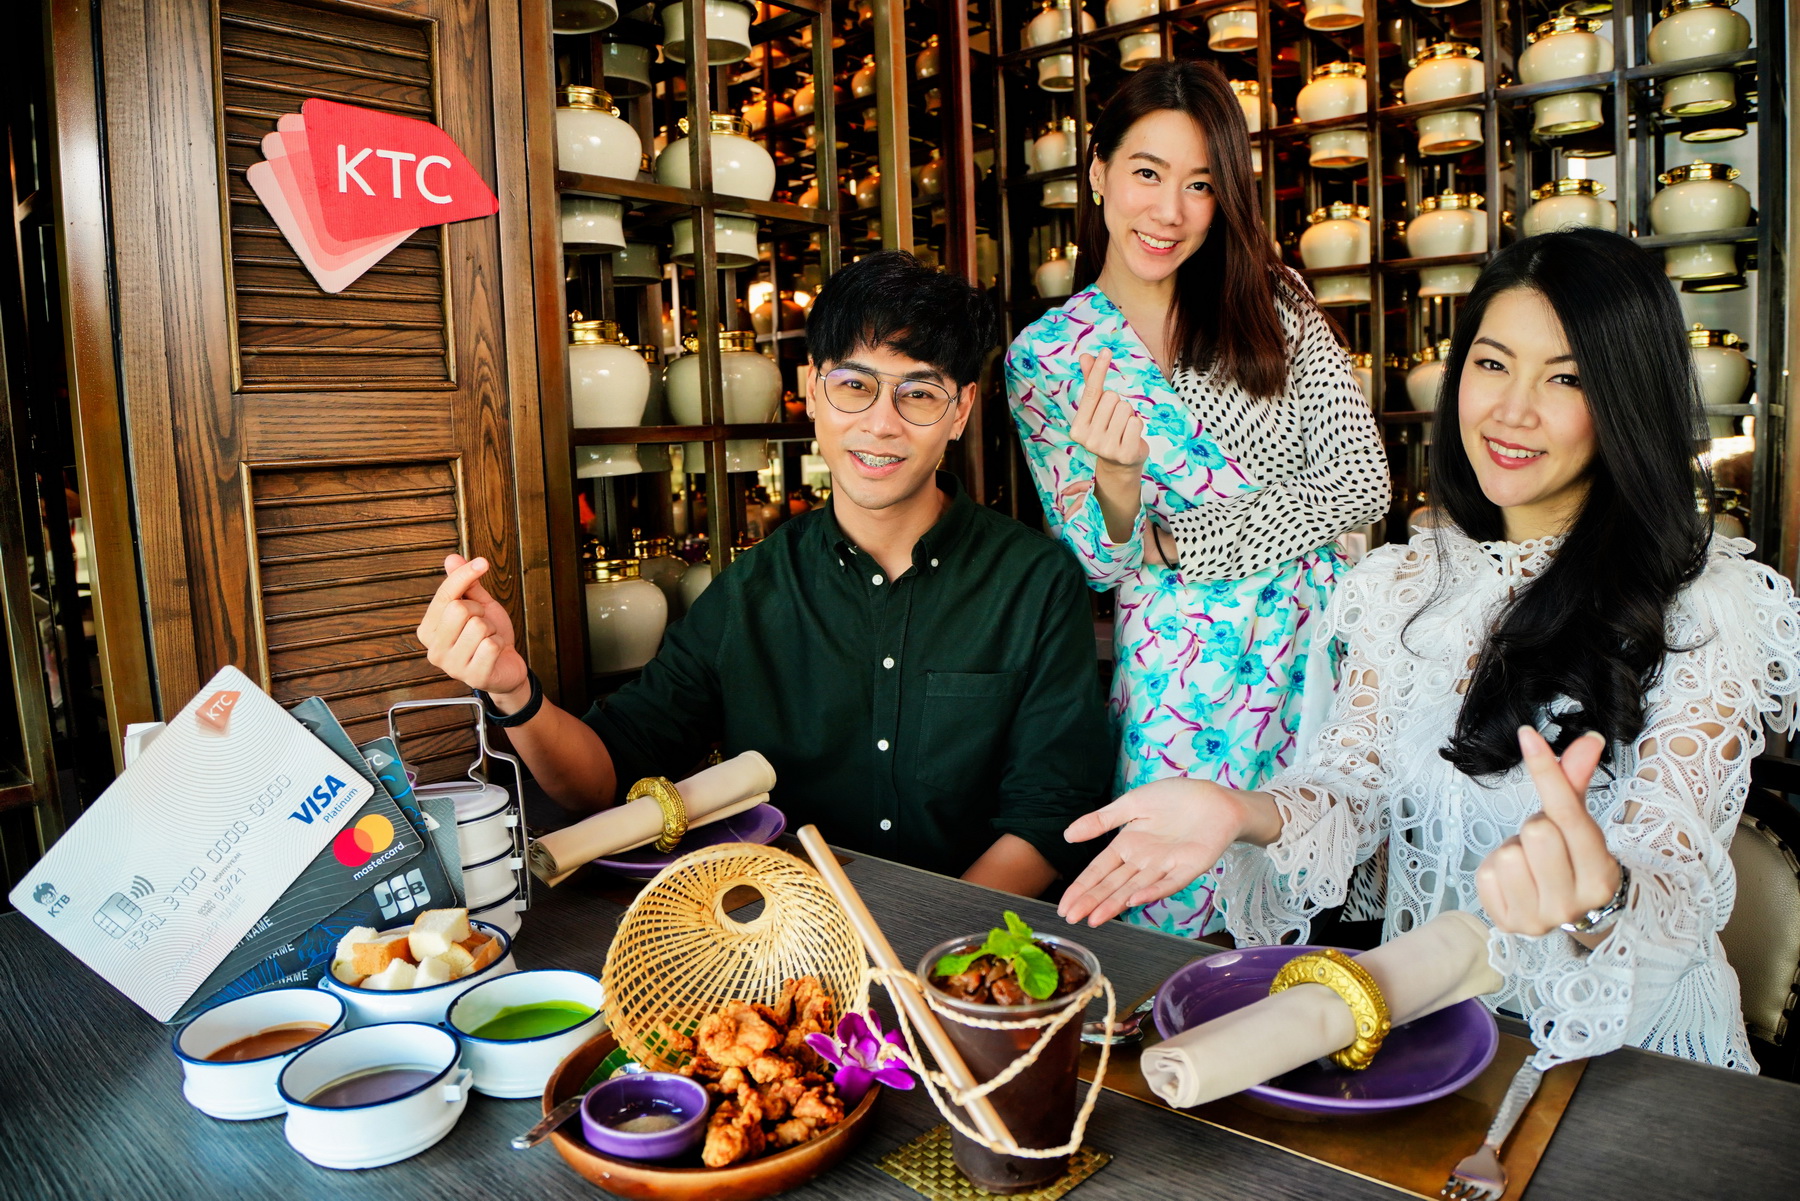 KTC provides cardmembers special privileges to dine delicious Thai cuisine at restaurants under Nara.